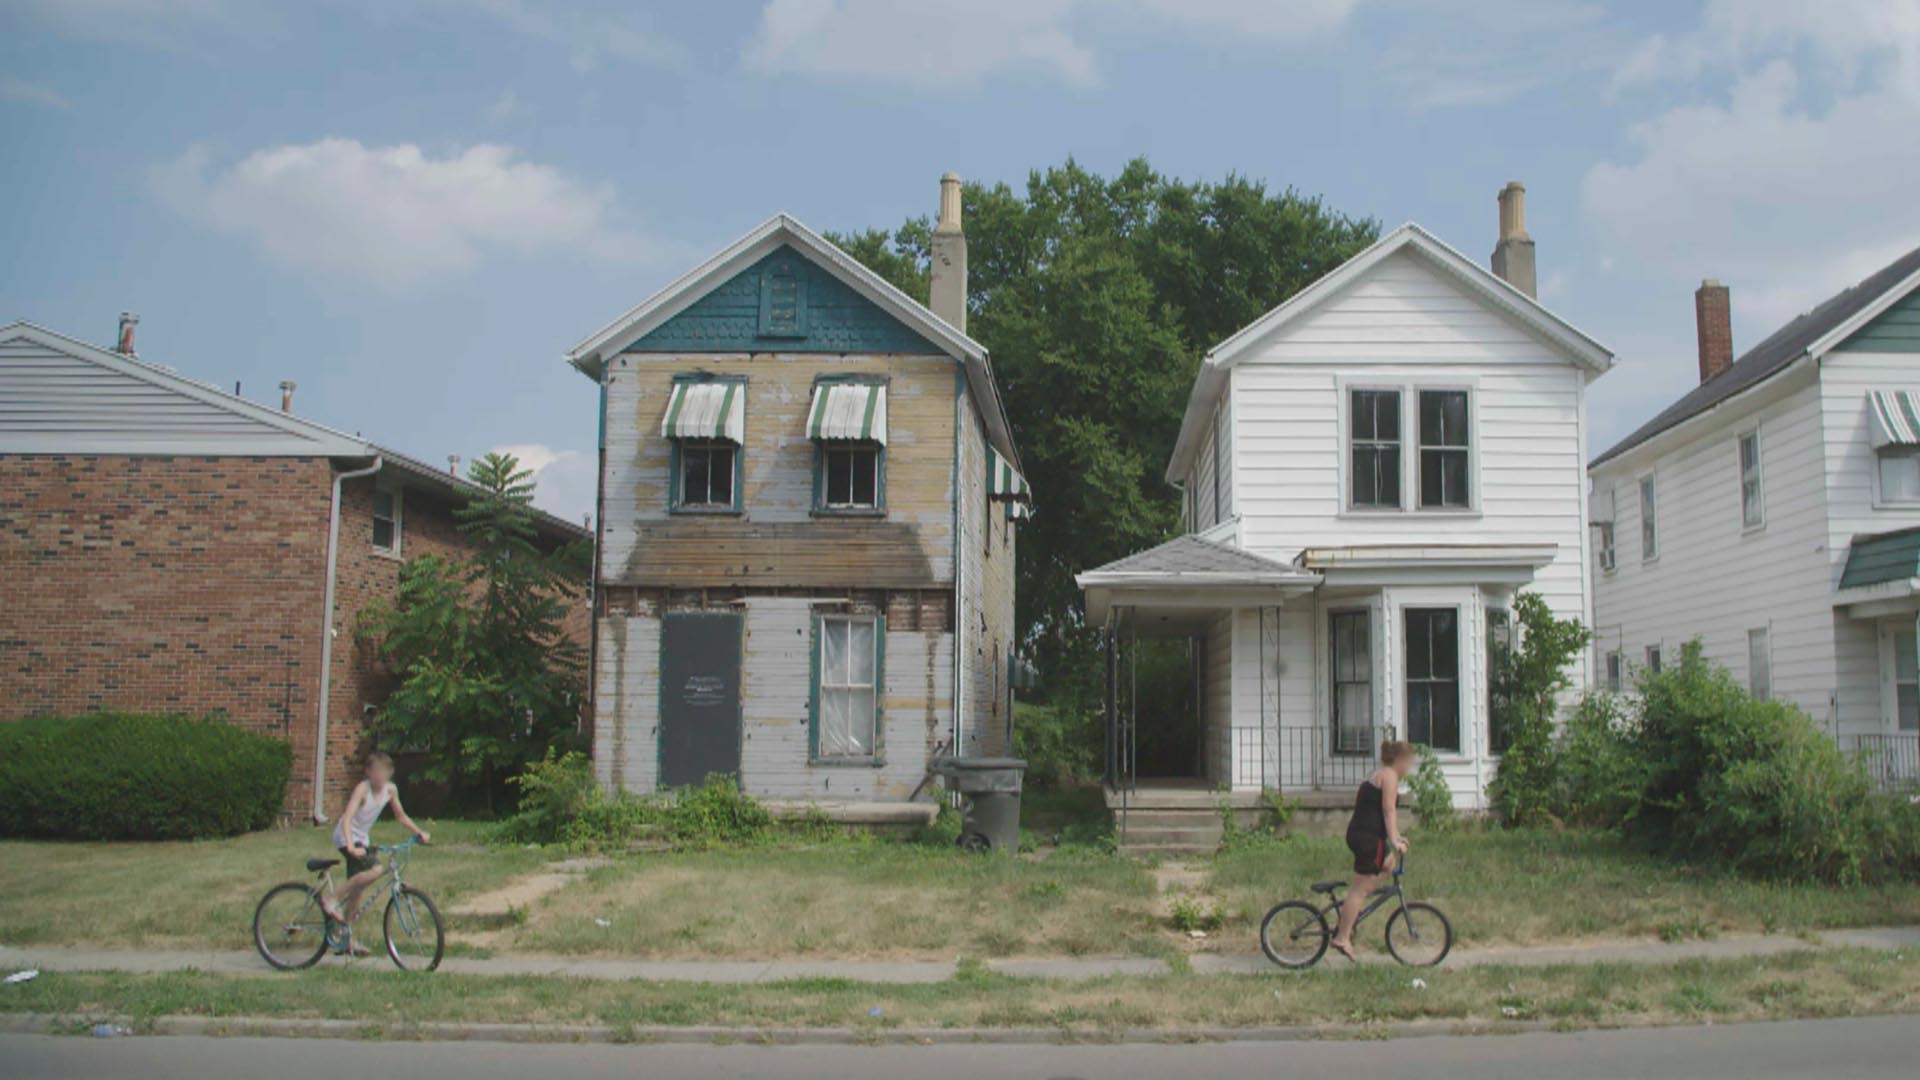 Two people on bicycles ride down a street in front of abandoned houses.